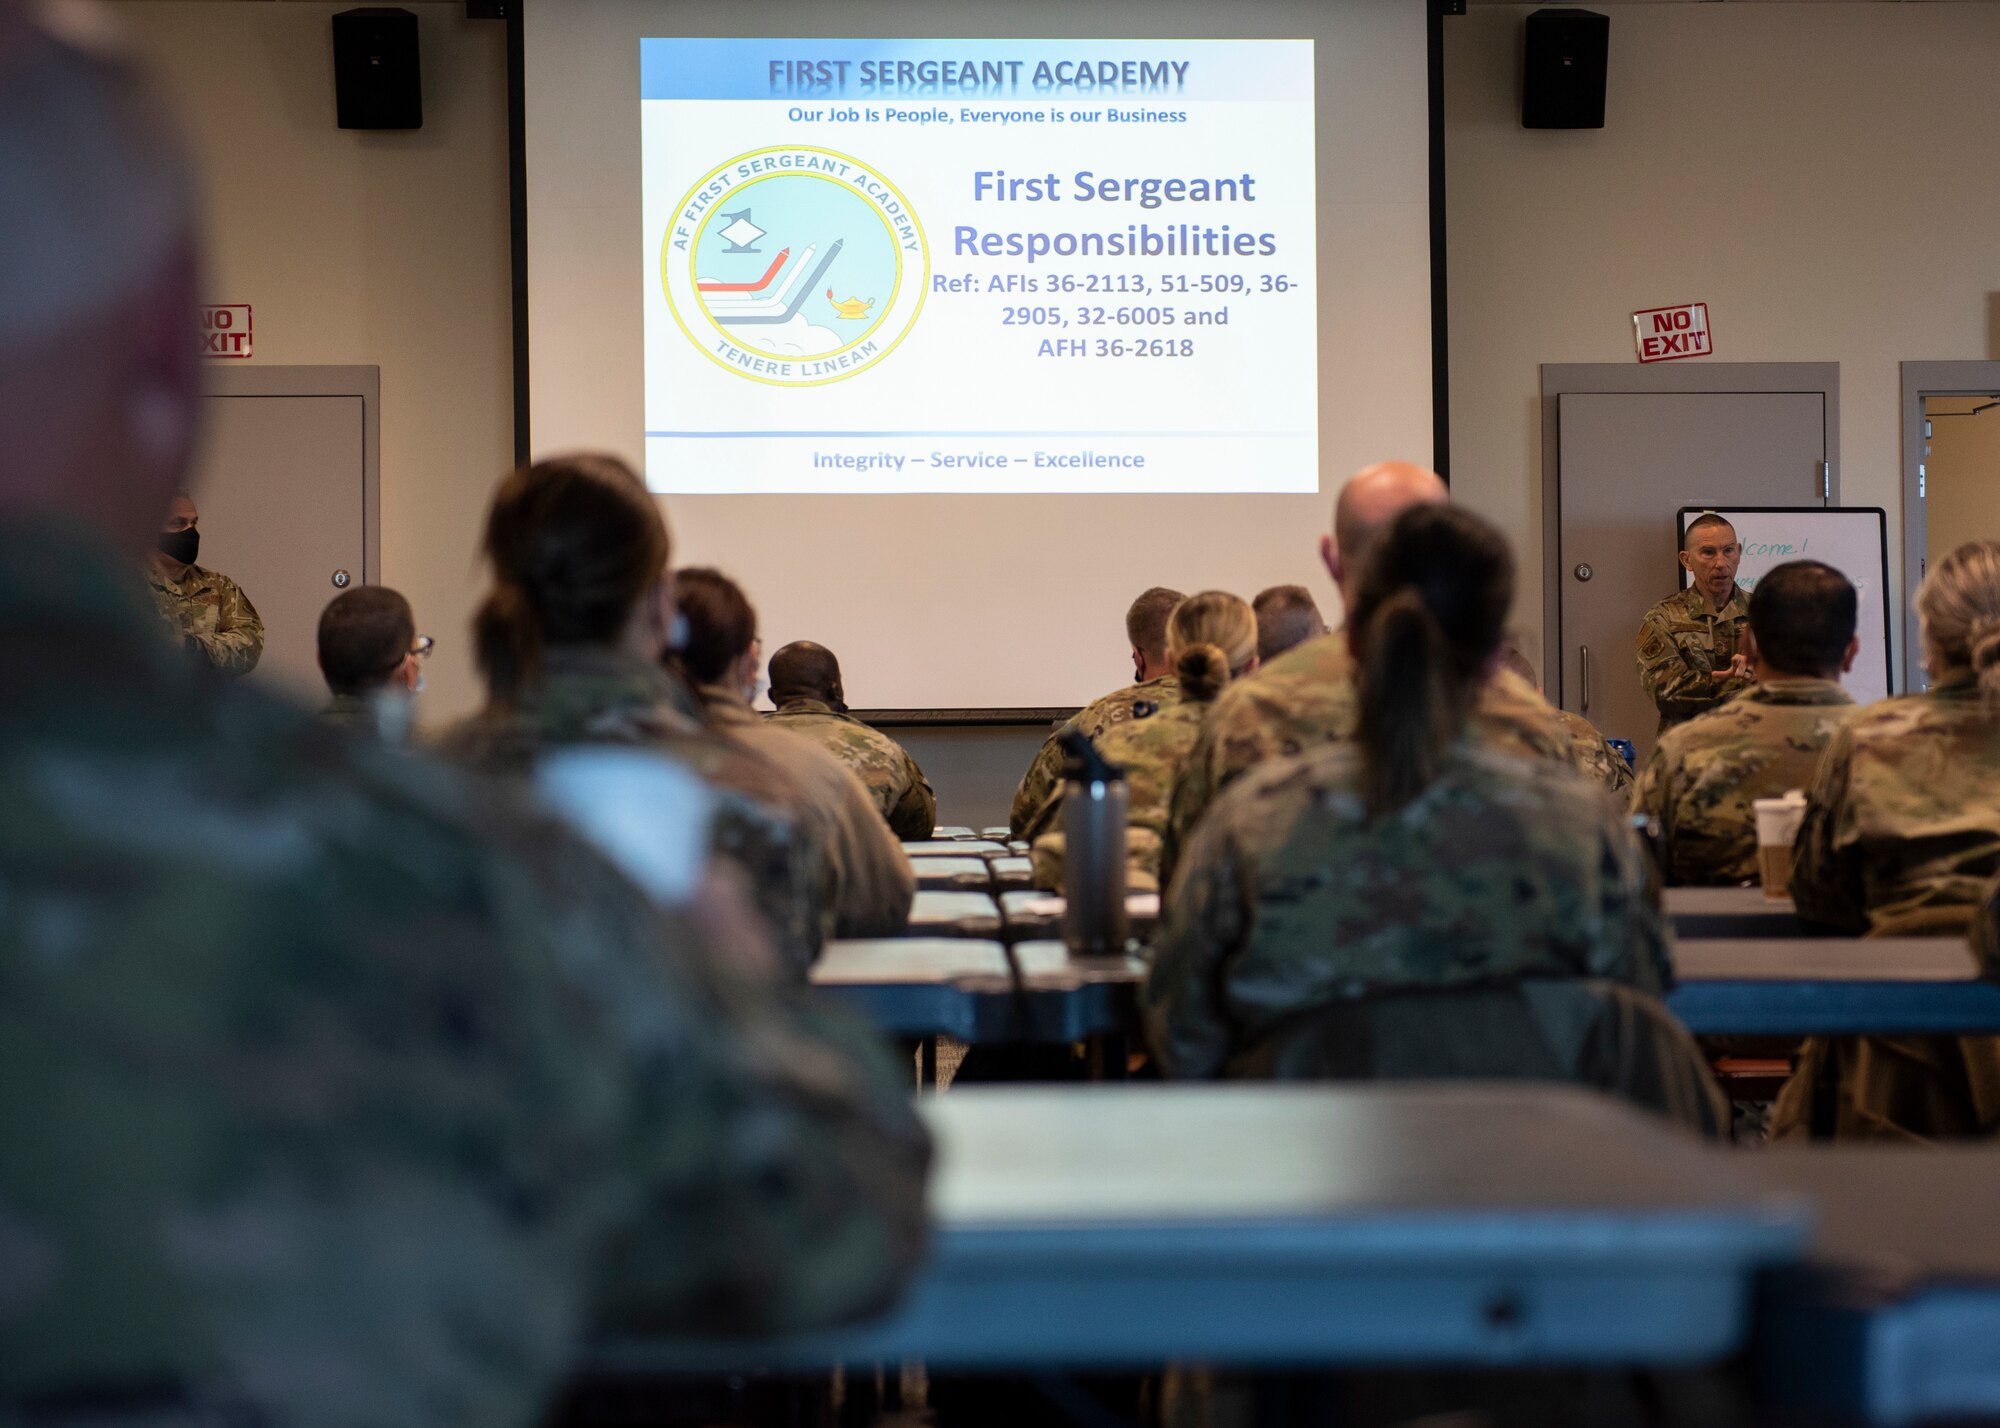 Chief Master Sgt. Sean Sullivan, Command Chief Master Sgt. for the state of Massachusetts, speaks to participants about the essential role played by a first sergeant on Otis Air National Guard Base, Massachusetts, May 10, 2022. As a former first sergeant of the 102nd Intelligence Wing, Sullivan advised from his personal experience. (U.S. Air National Guard photo by Airman 1st Class Francesca Skridulis)